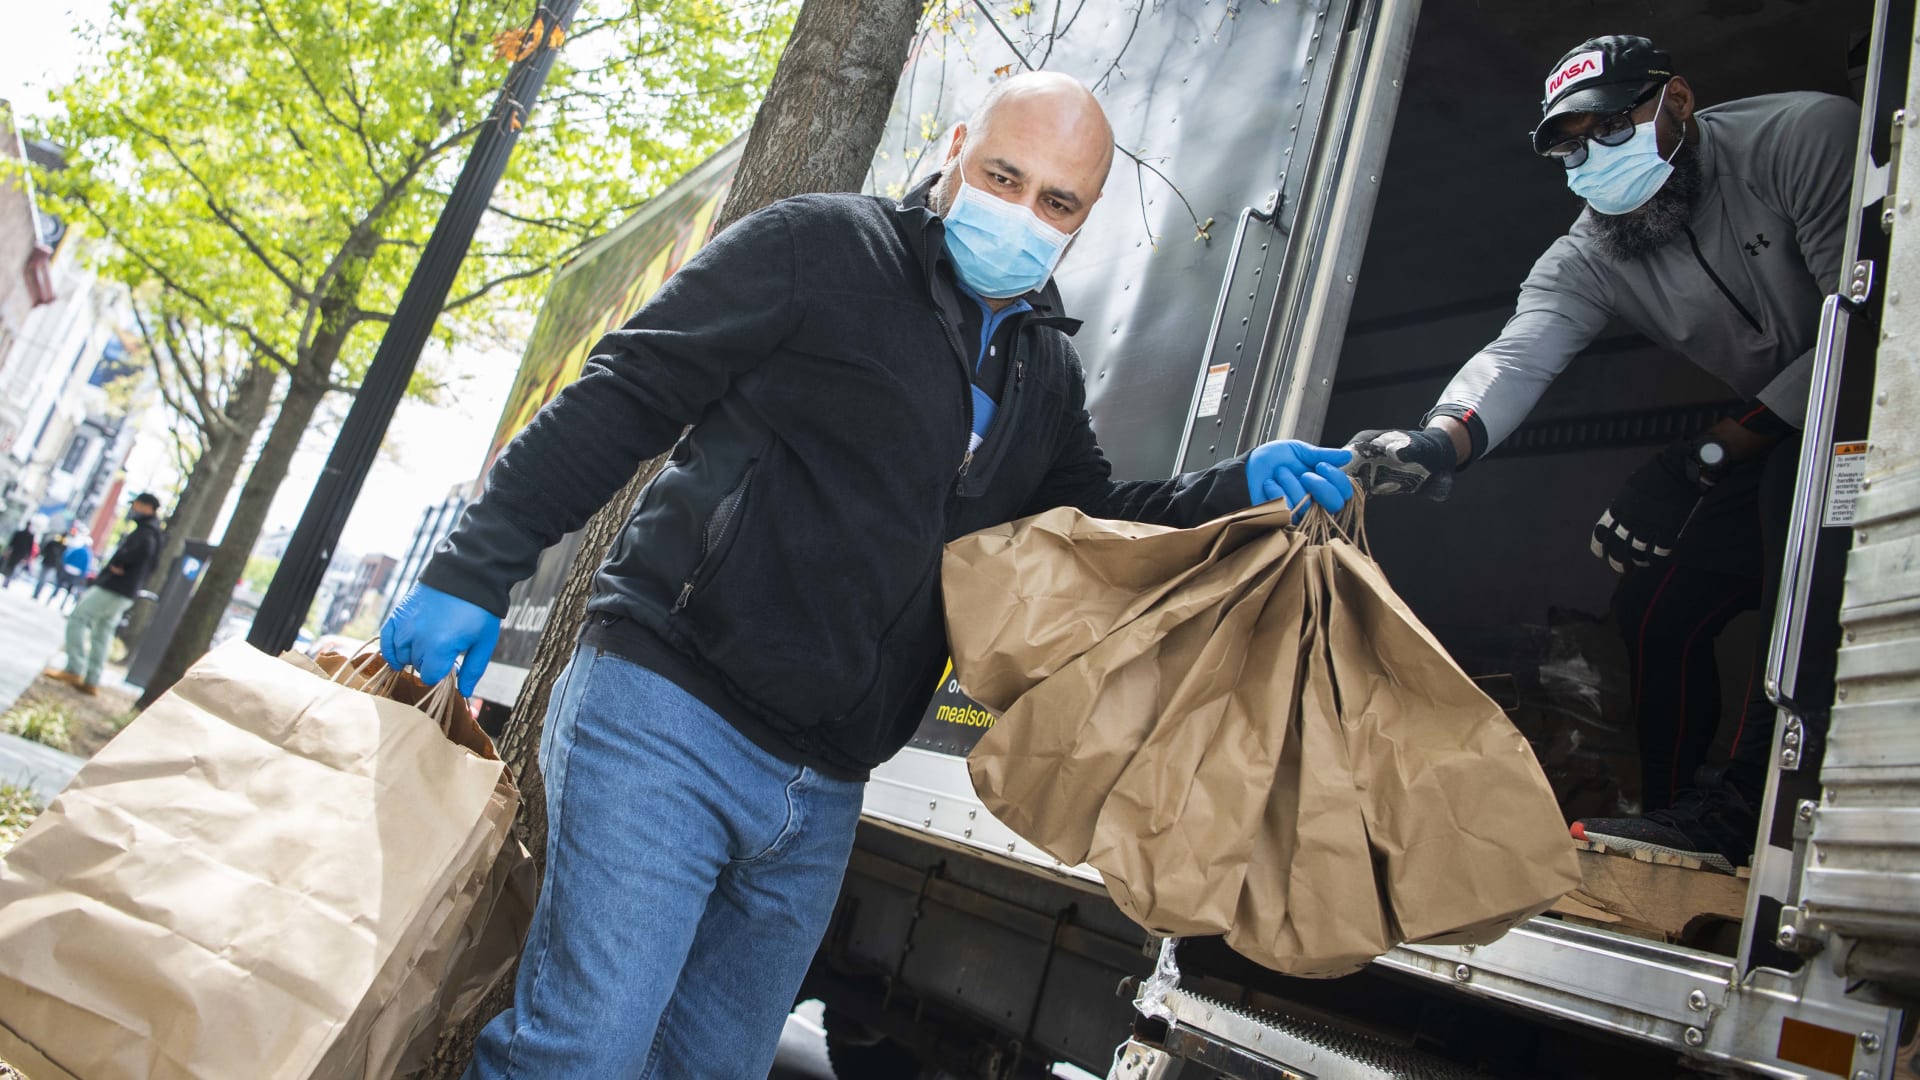 3 Ways Companies Have Shown Corporate Social Responsibility During the Pandemic